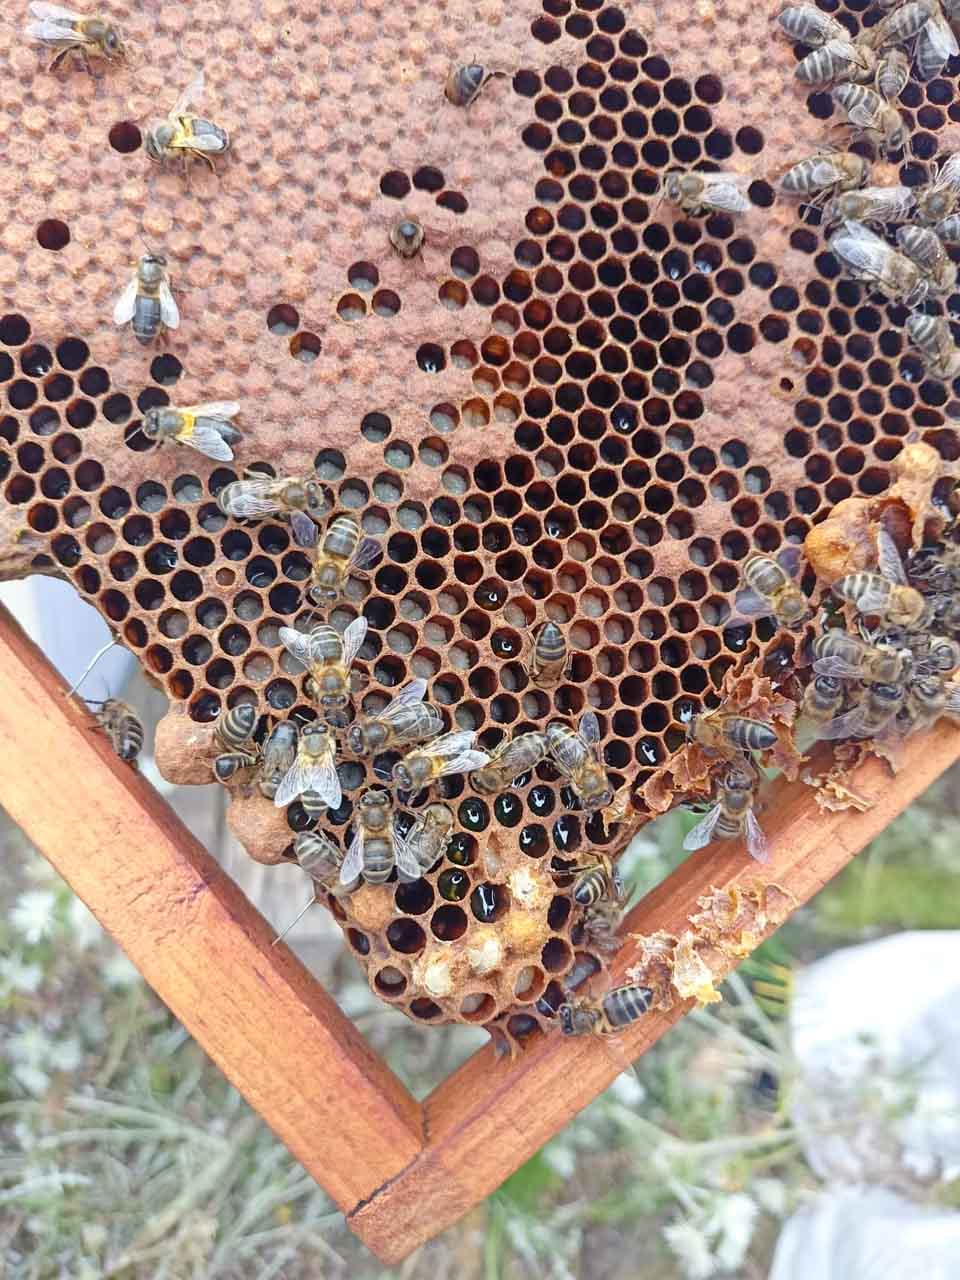 A close-up shot of a hive frame with capped honey and brood cells